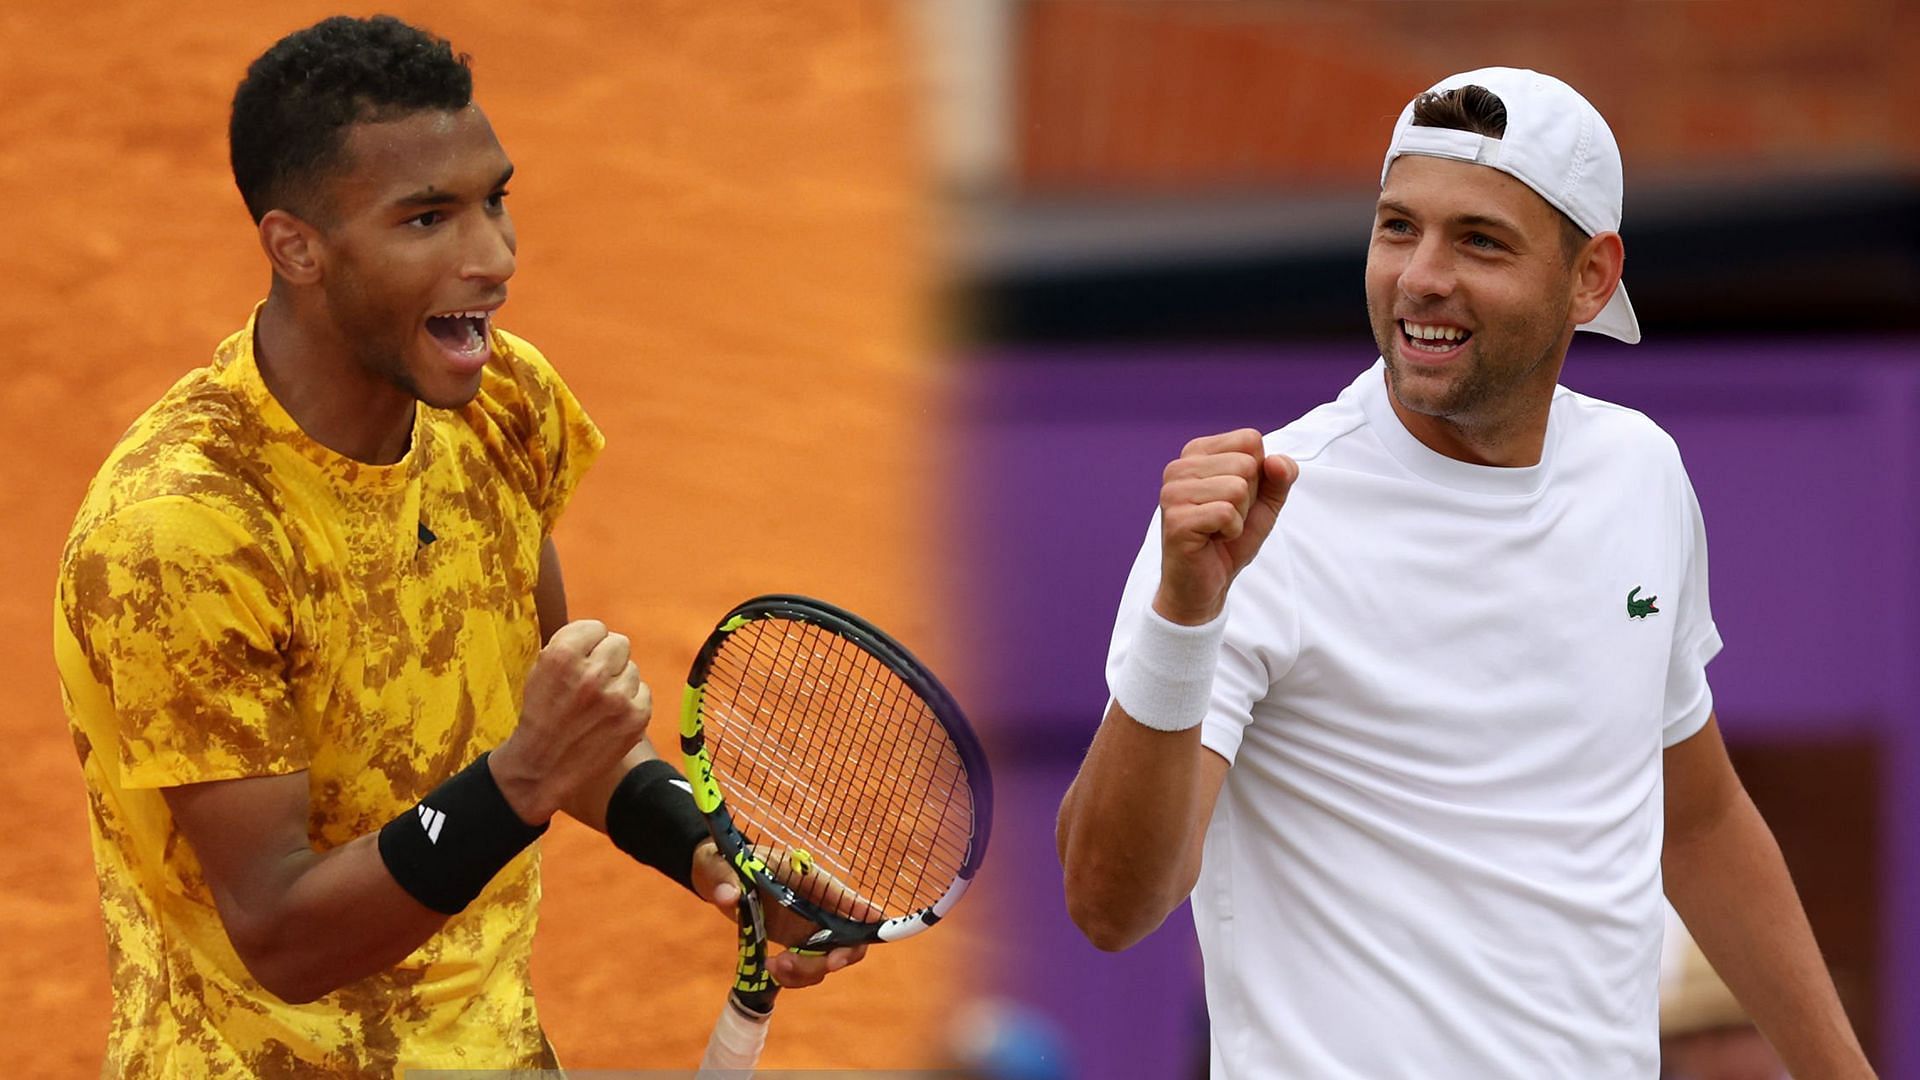 Felix Auger-Aliassime vs Filip Krajinovic is one of the first-round matches at the 2023 Wimbledon.